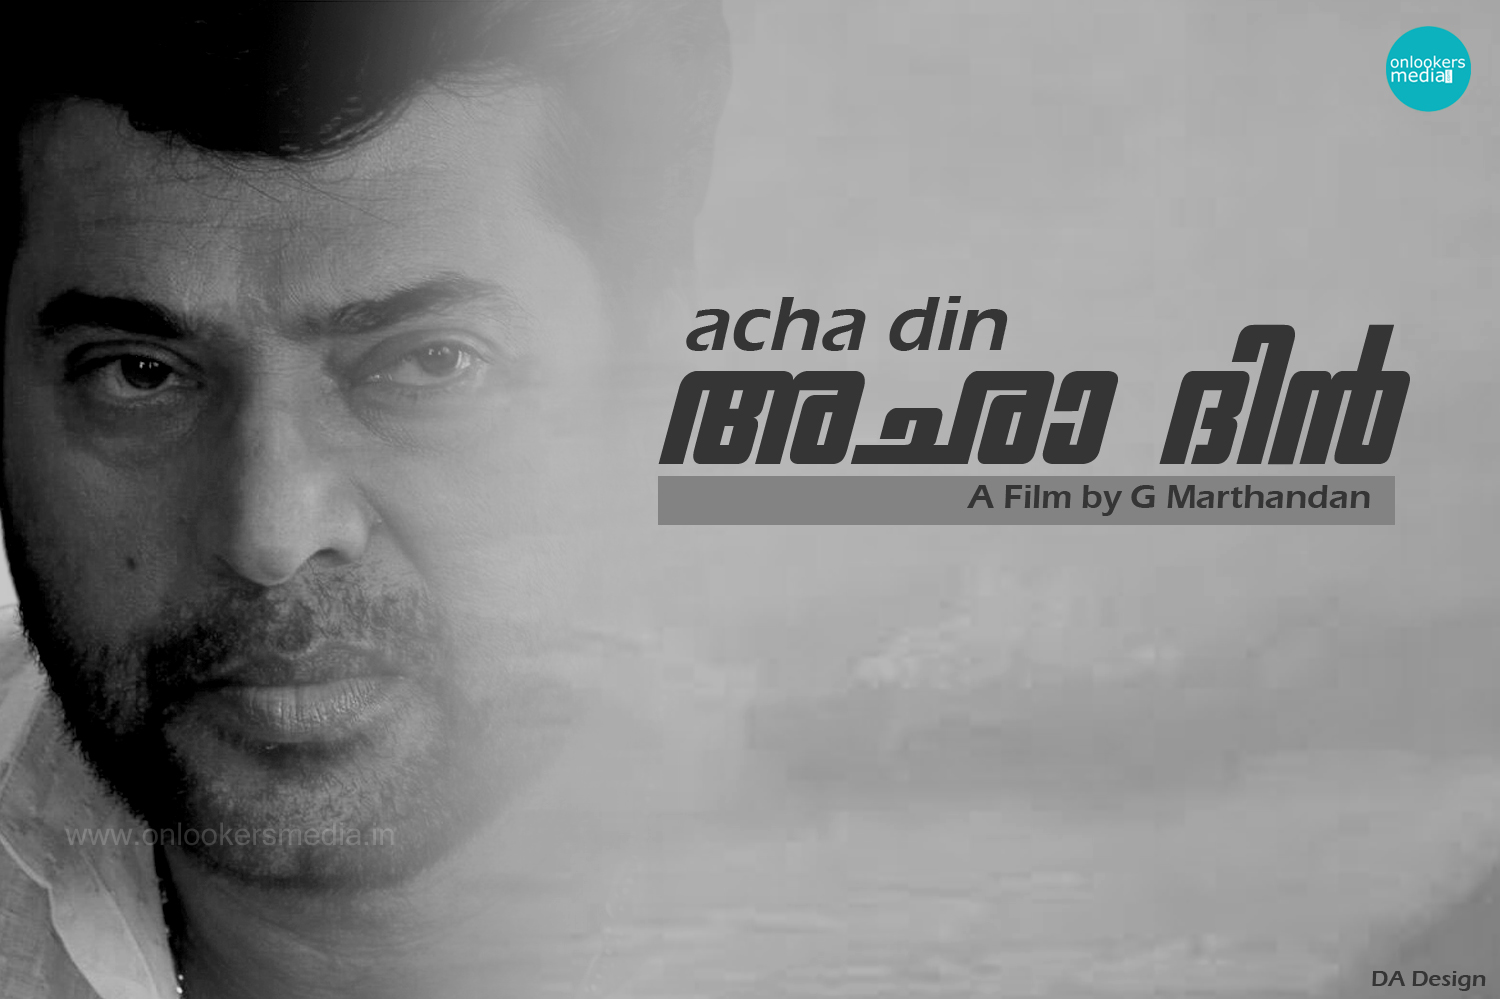 Mammootty in Acha Din Malayalam Movie-Stills-Images-Photos-Gallery-Videos-MP3-Onlookers Media